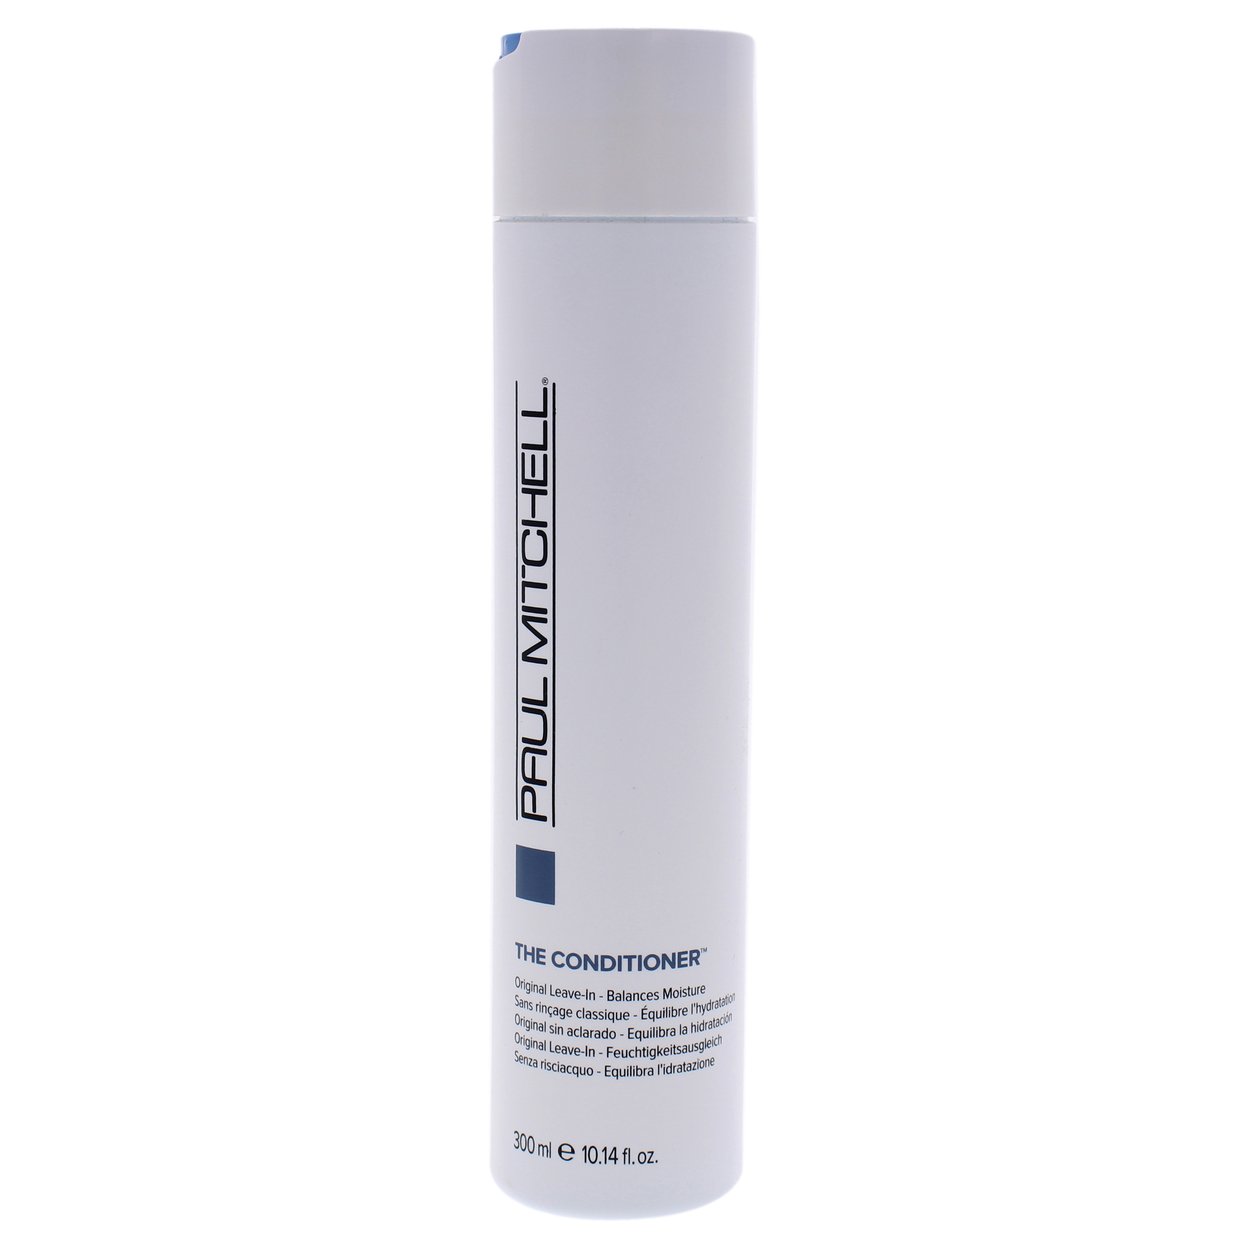 Paul Mitchell The Conditioner 10.14 Oz